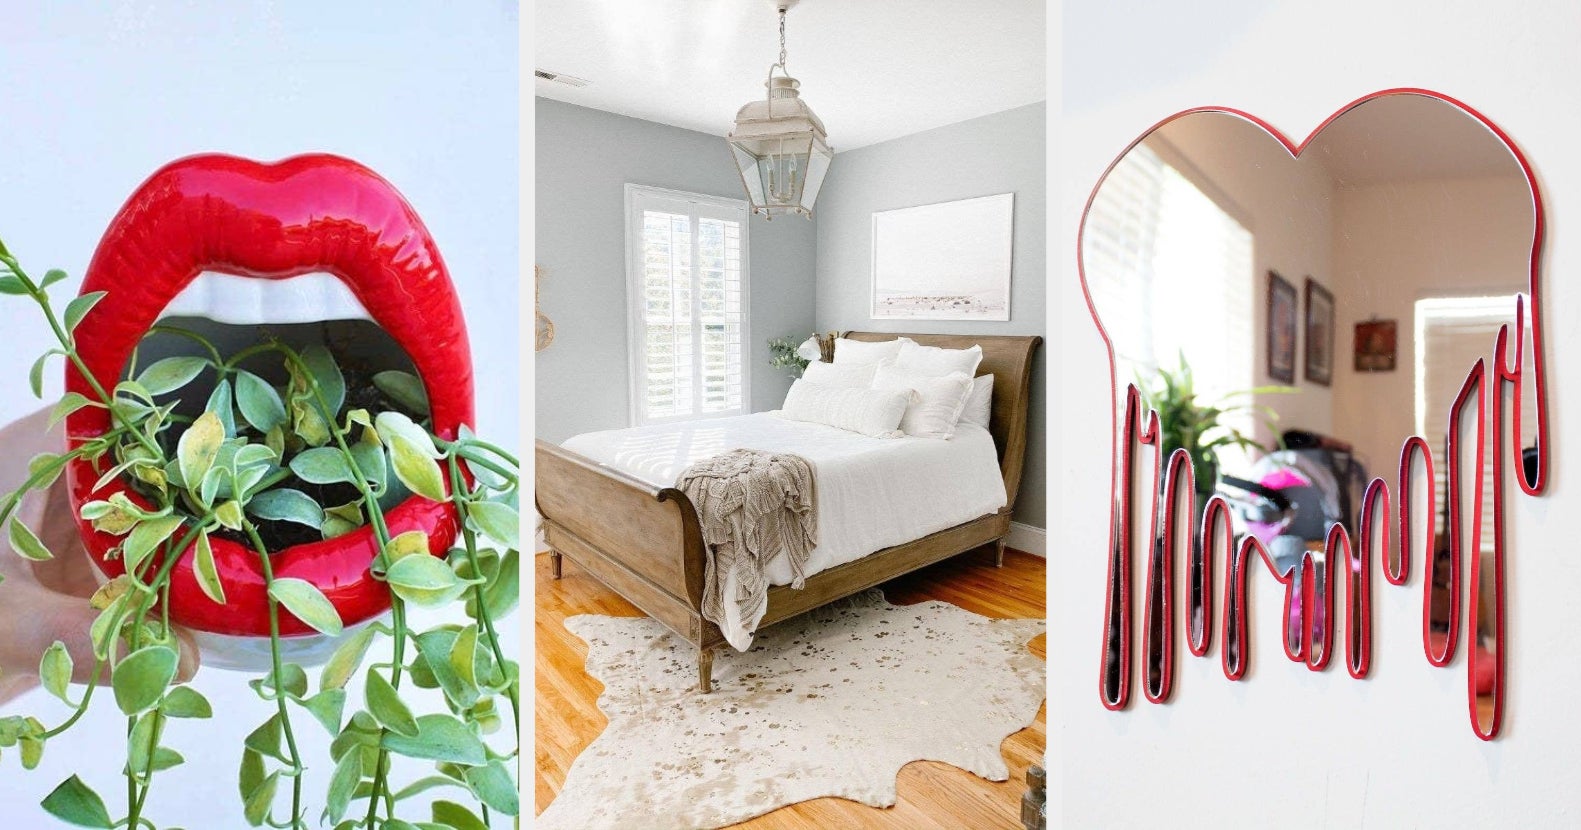 27 Inexpensive Home Decor Items That Look Like They Cost A Fortune